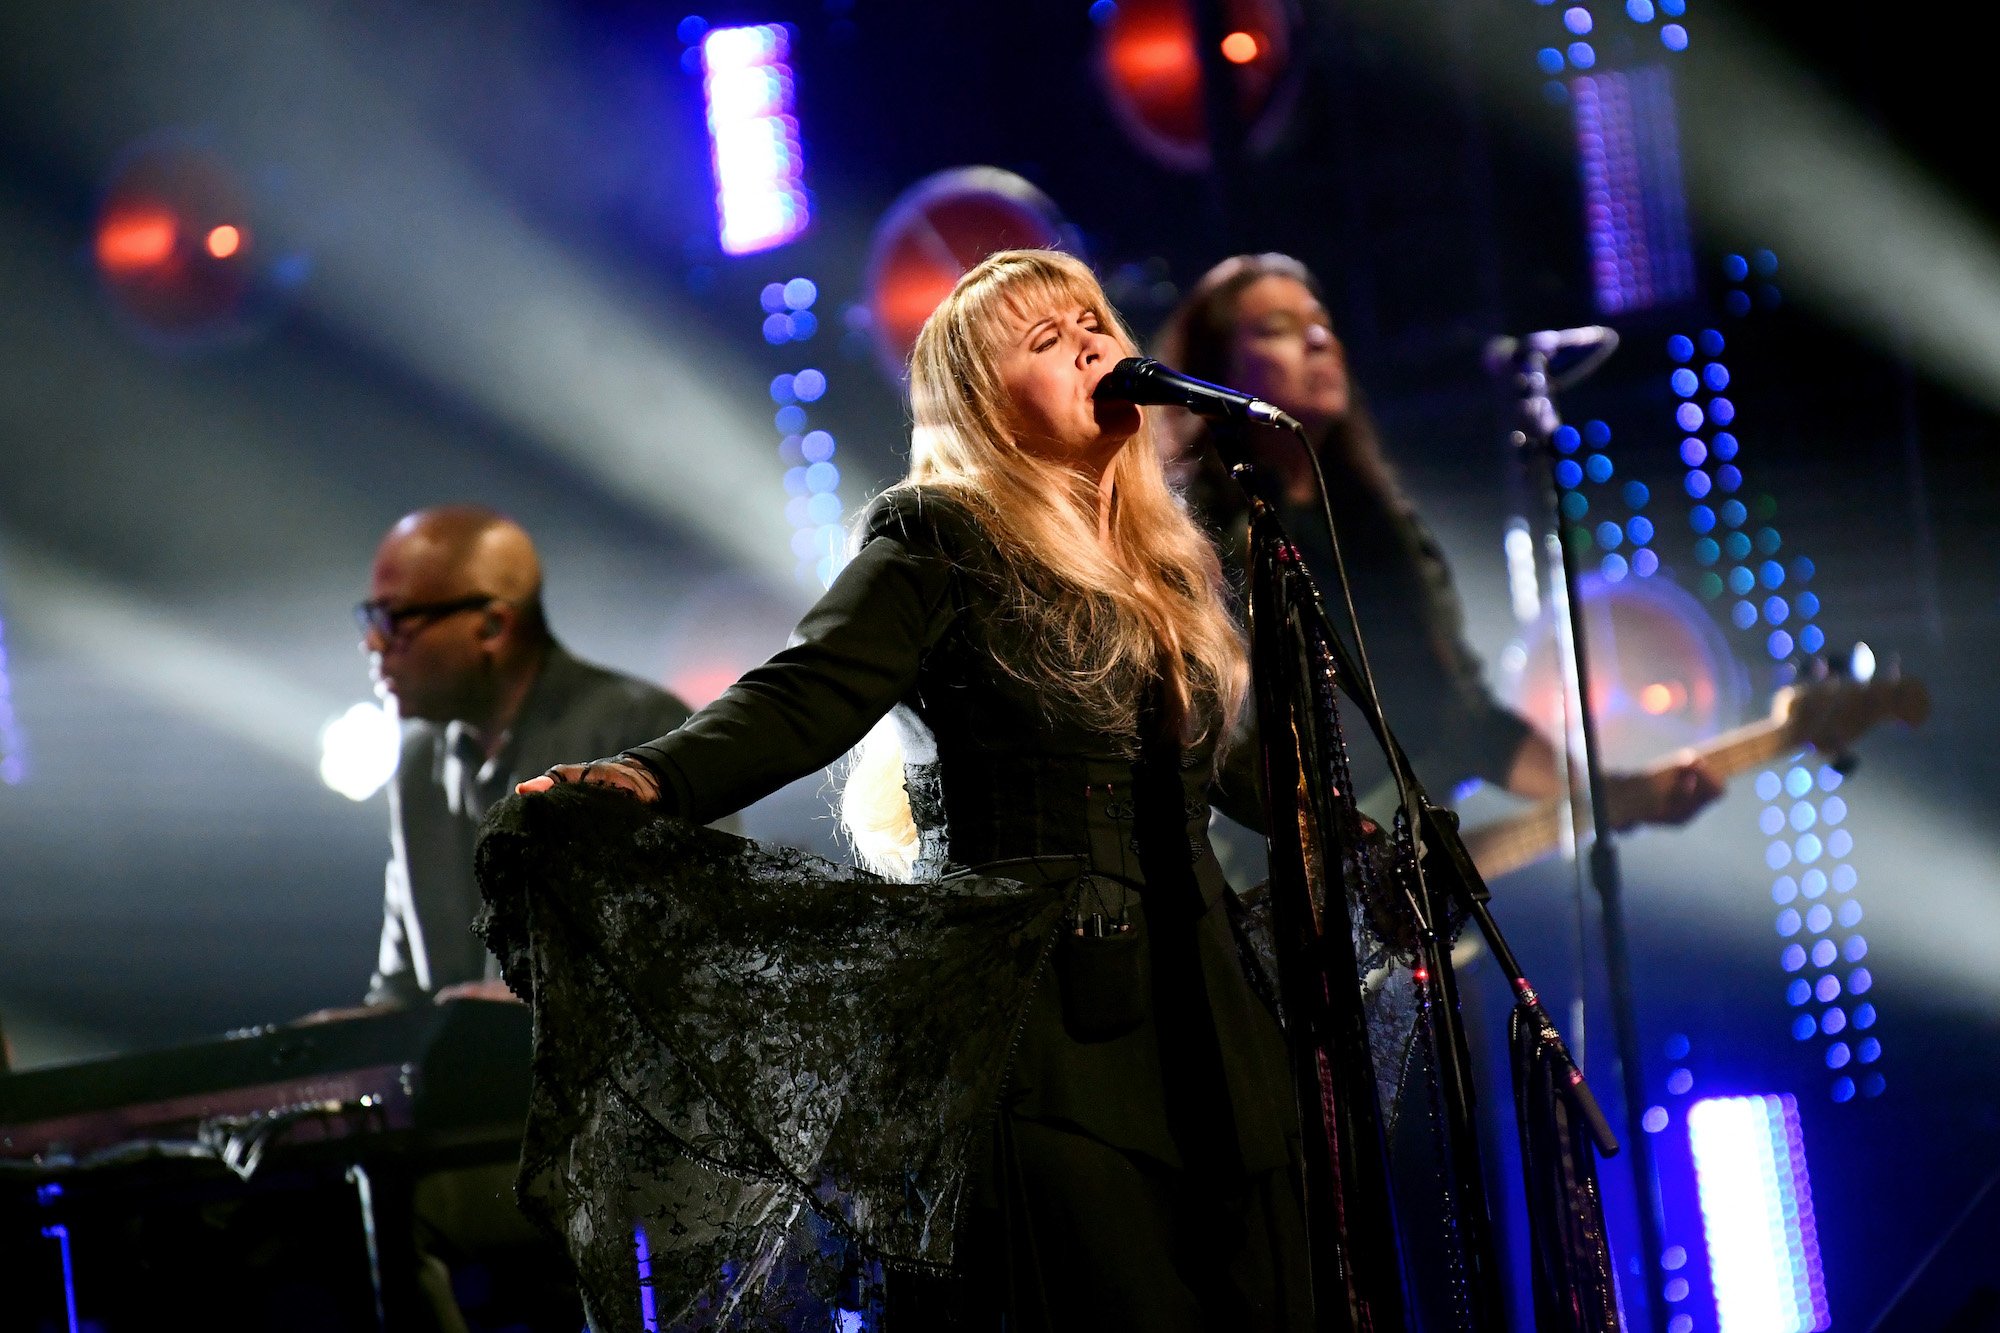 Stevie Nicks singing on stage, arms outstretched